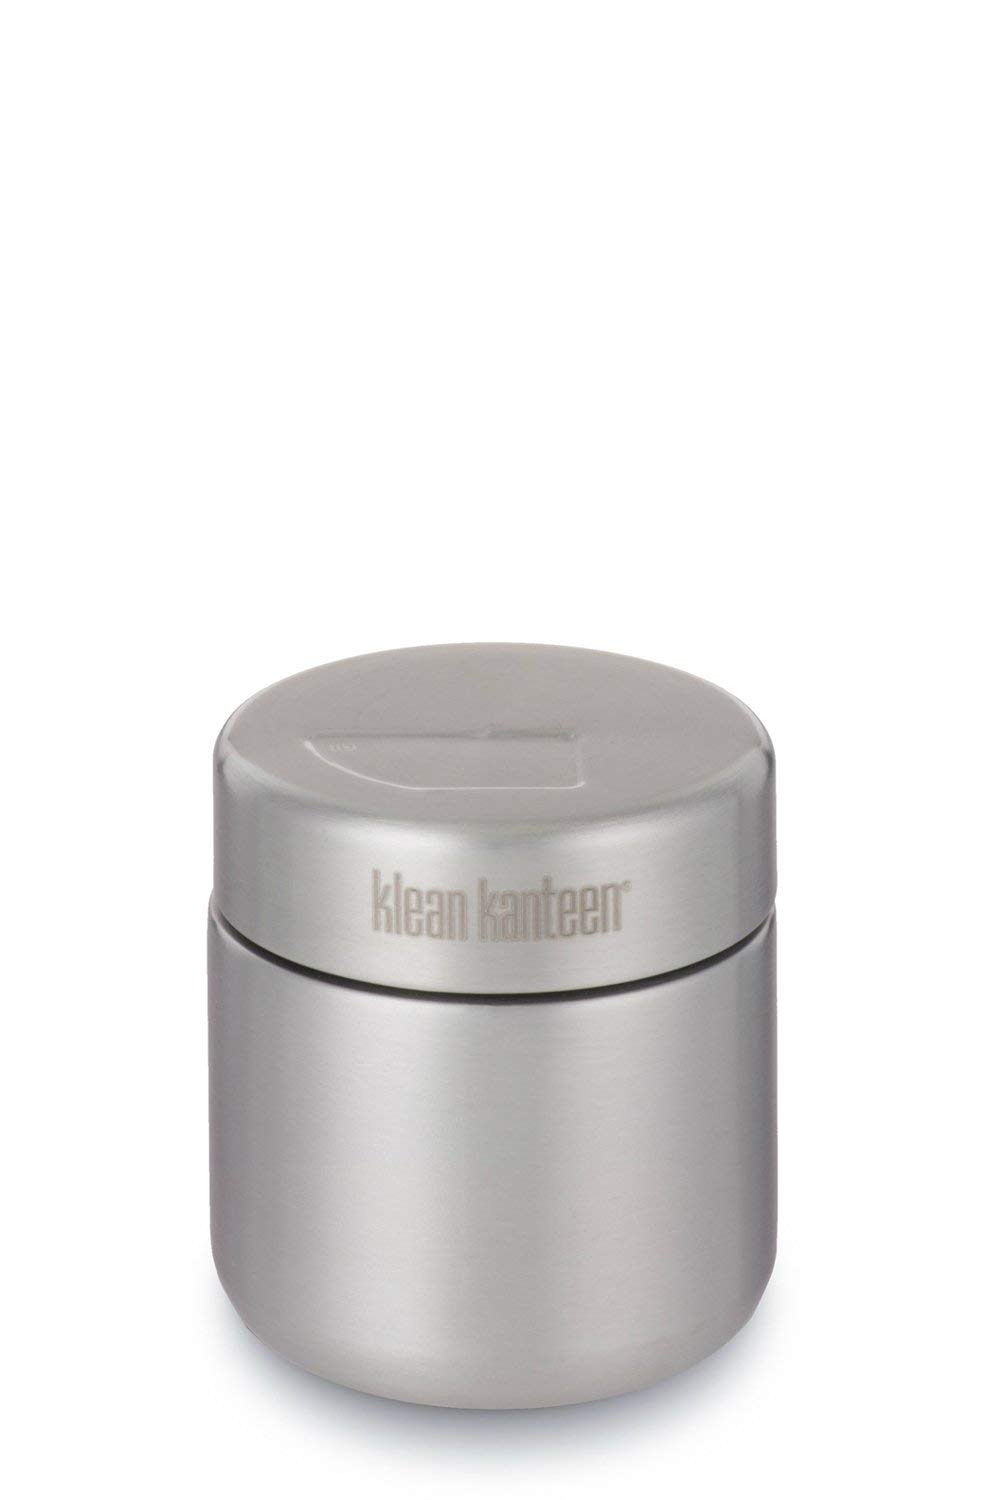 Klean Kanteen Single Wall Stainless Steel Food Container